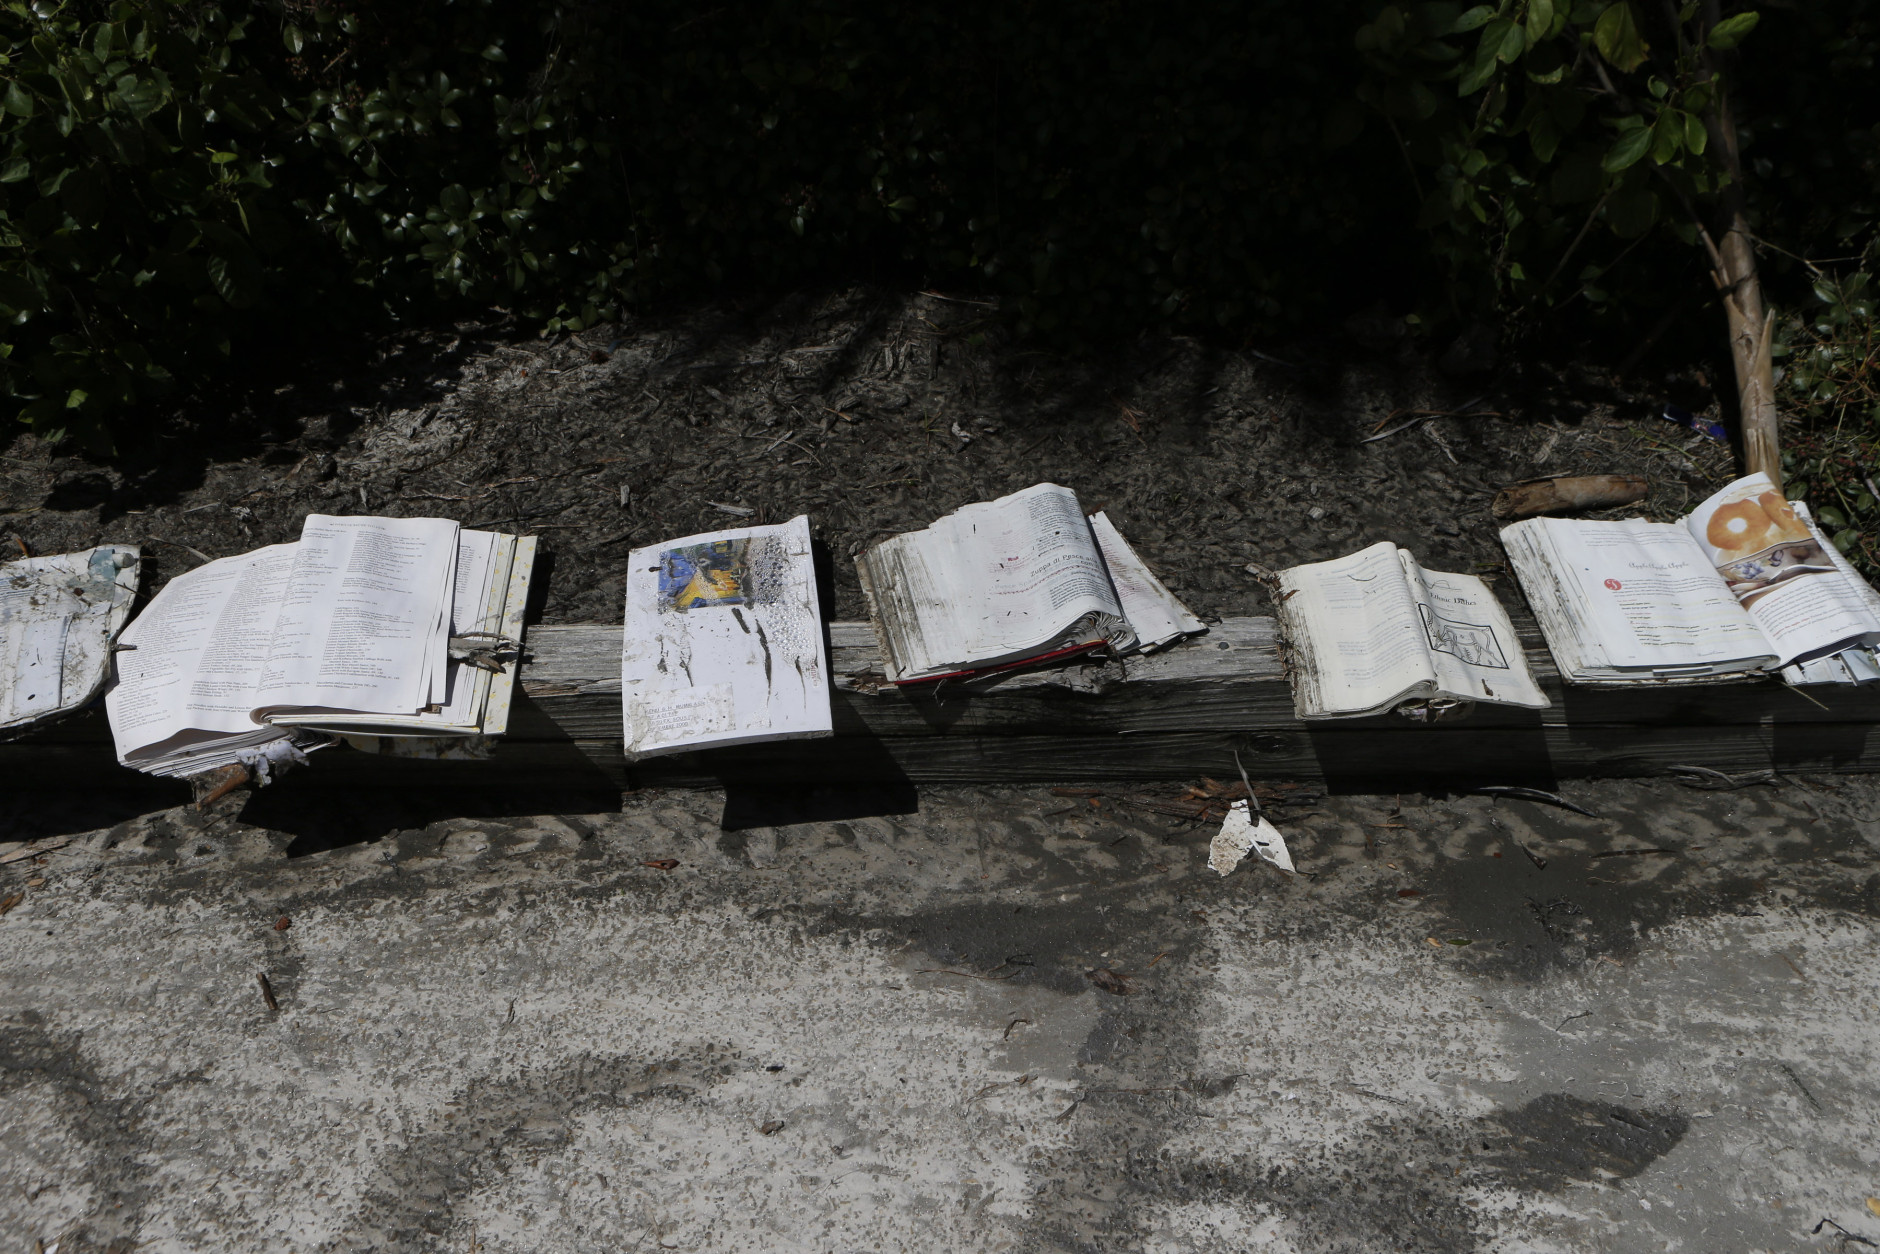 CEDAR KEY, FL - SEPTEMBER 2:  Saltwater-soaked books are left to dry in the sun in the parking lot of the Cedar Cove resort after being damaged by the winds and storm surge associated with Hurricane Hermine which made landfall overnight in the area on September 2, 2016 in Cedar Key, Florida. Hermine made landfall as a Category 1 hurricane but has weakened back to a tropical storm. (Photo by Brian Blanco/Getty Images)